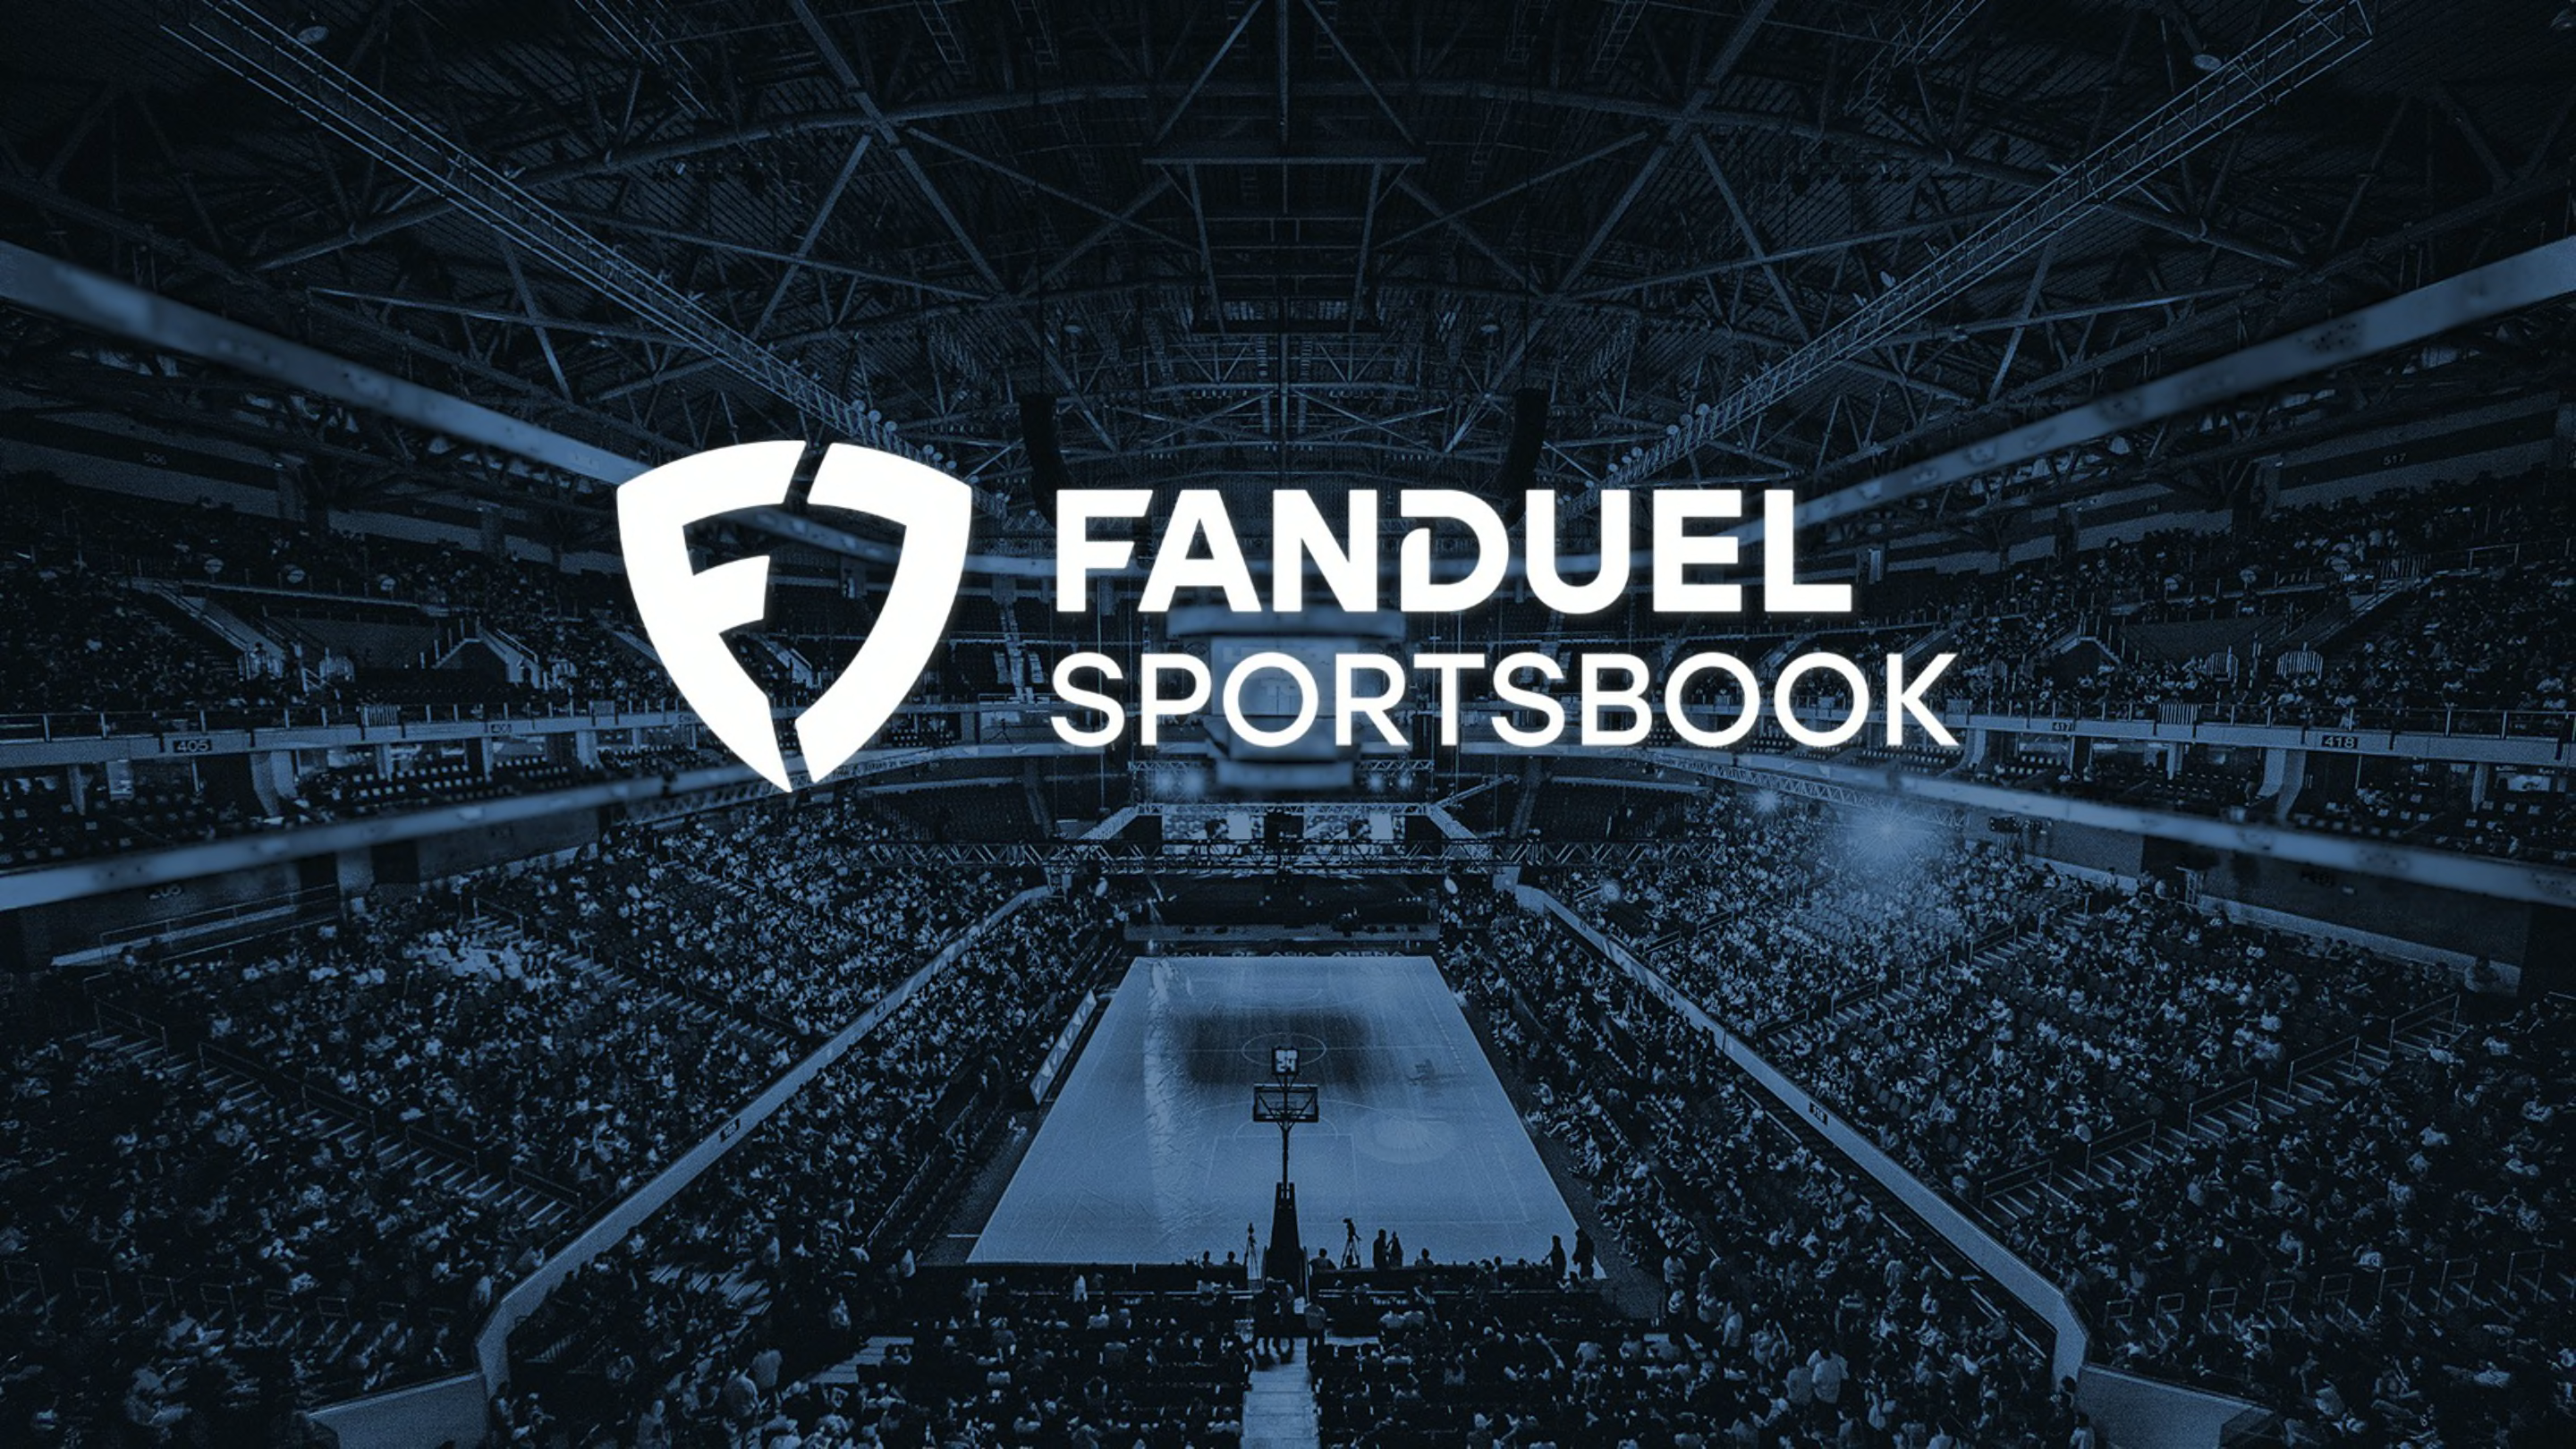 How to Claim FanDuel Colorado Promo Code and Use $150 Bonus Bets
Before it Expires 